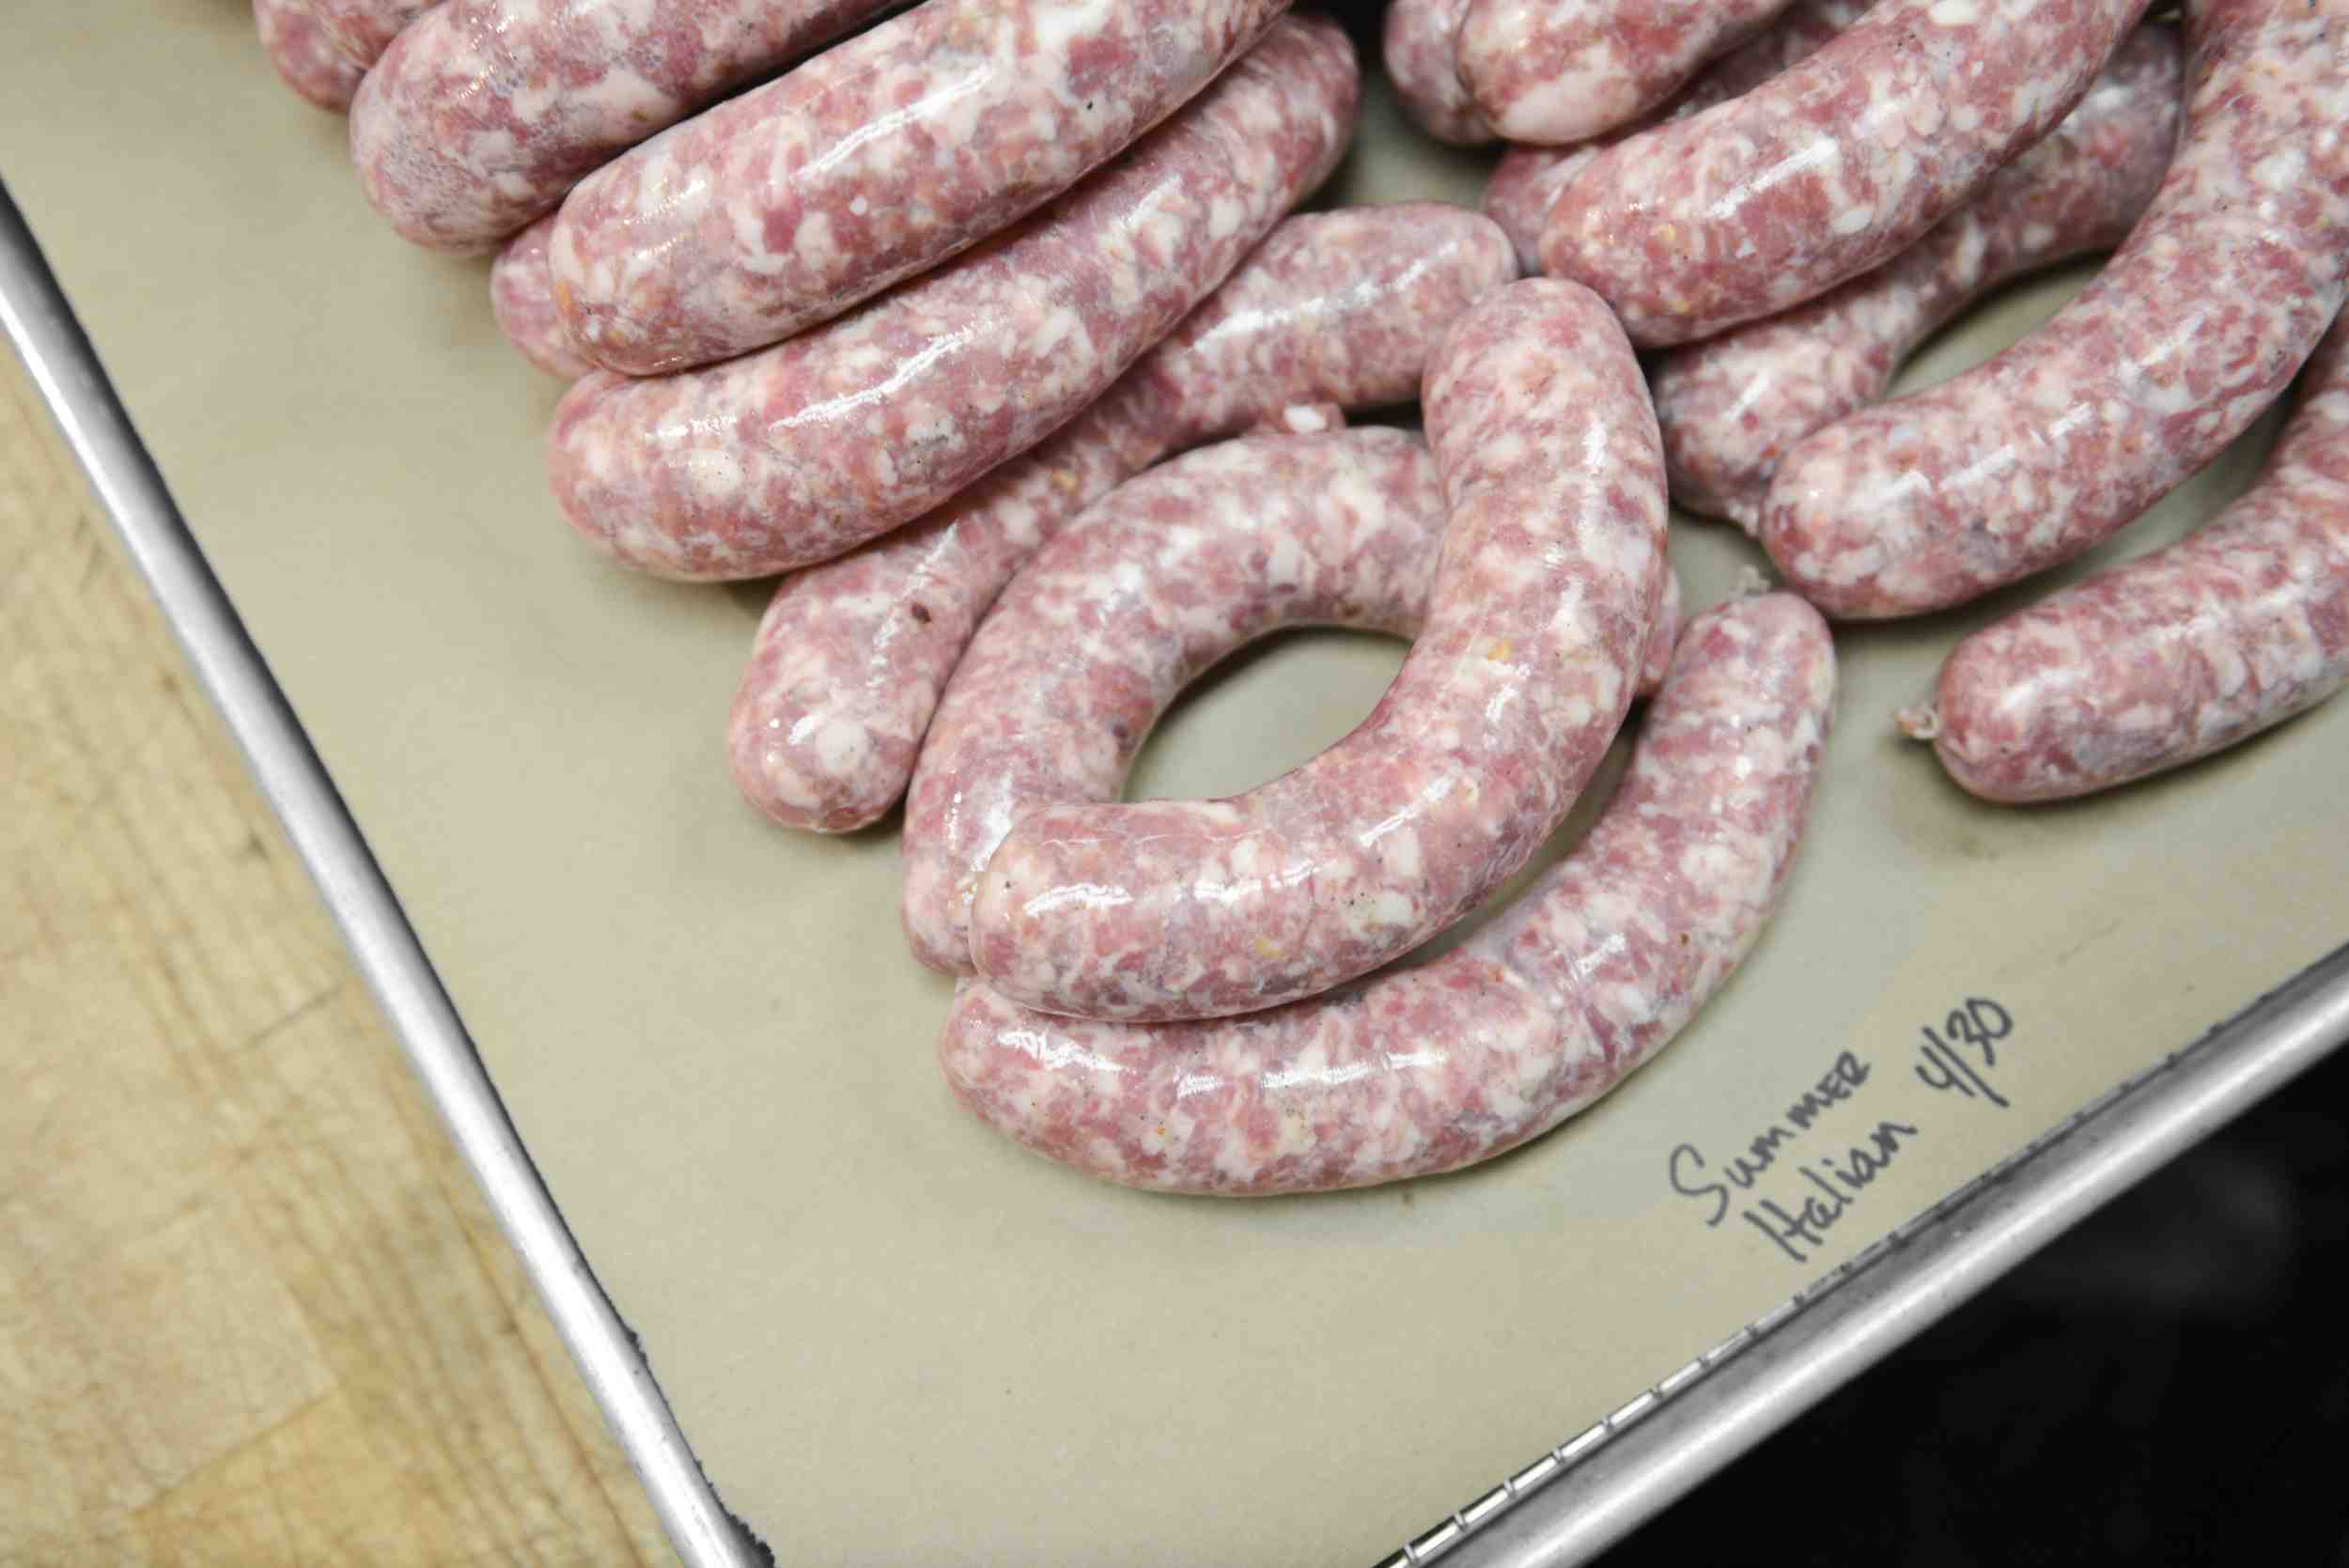 What are the white things in sausage?